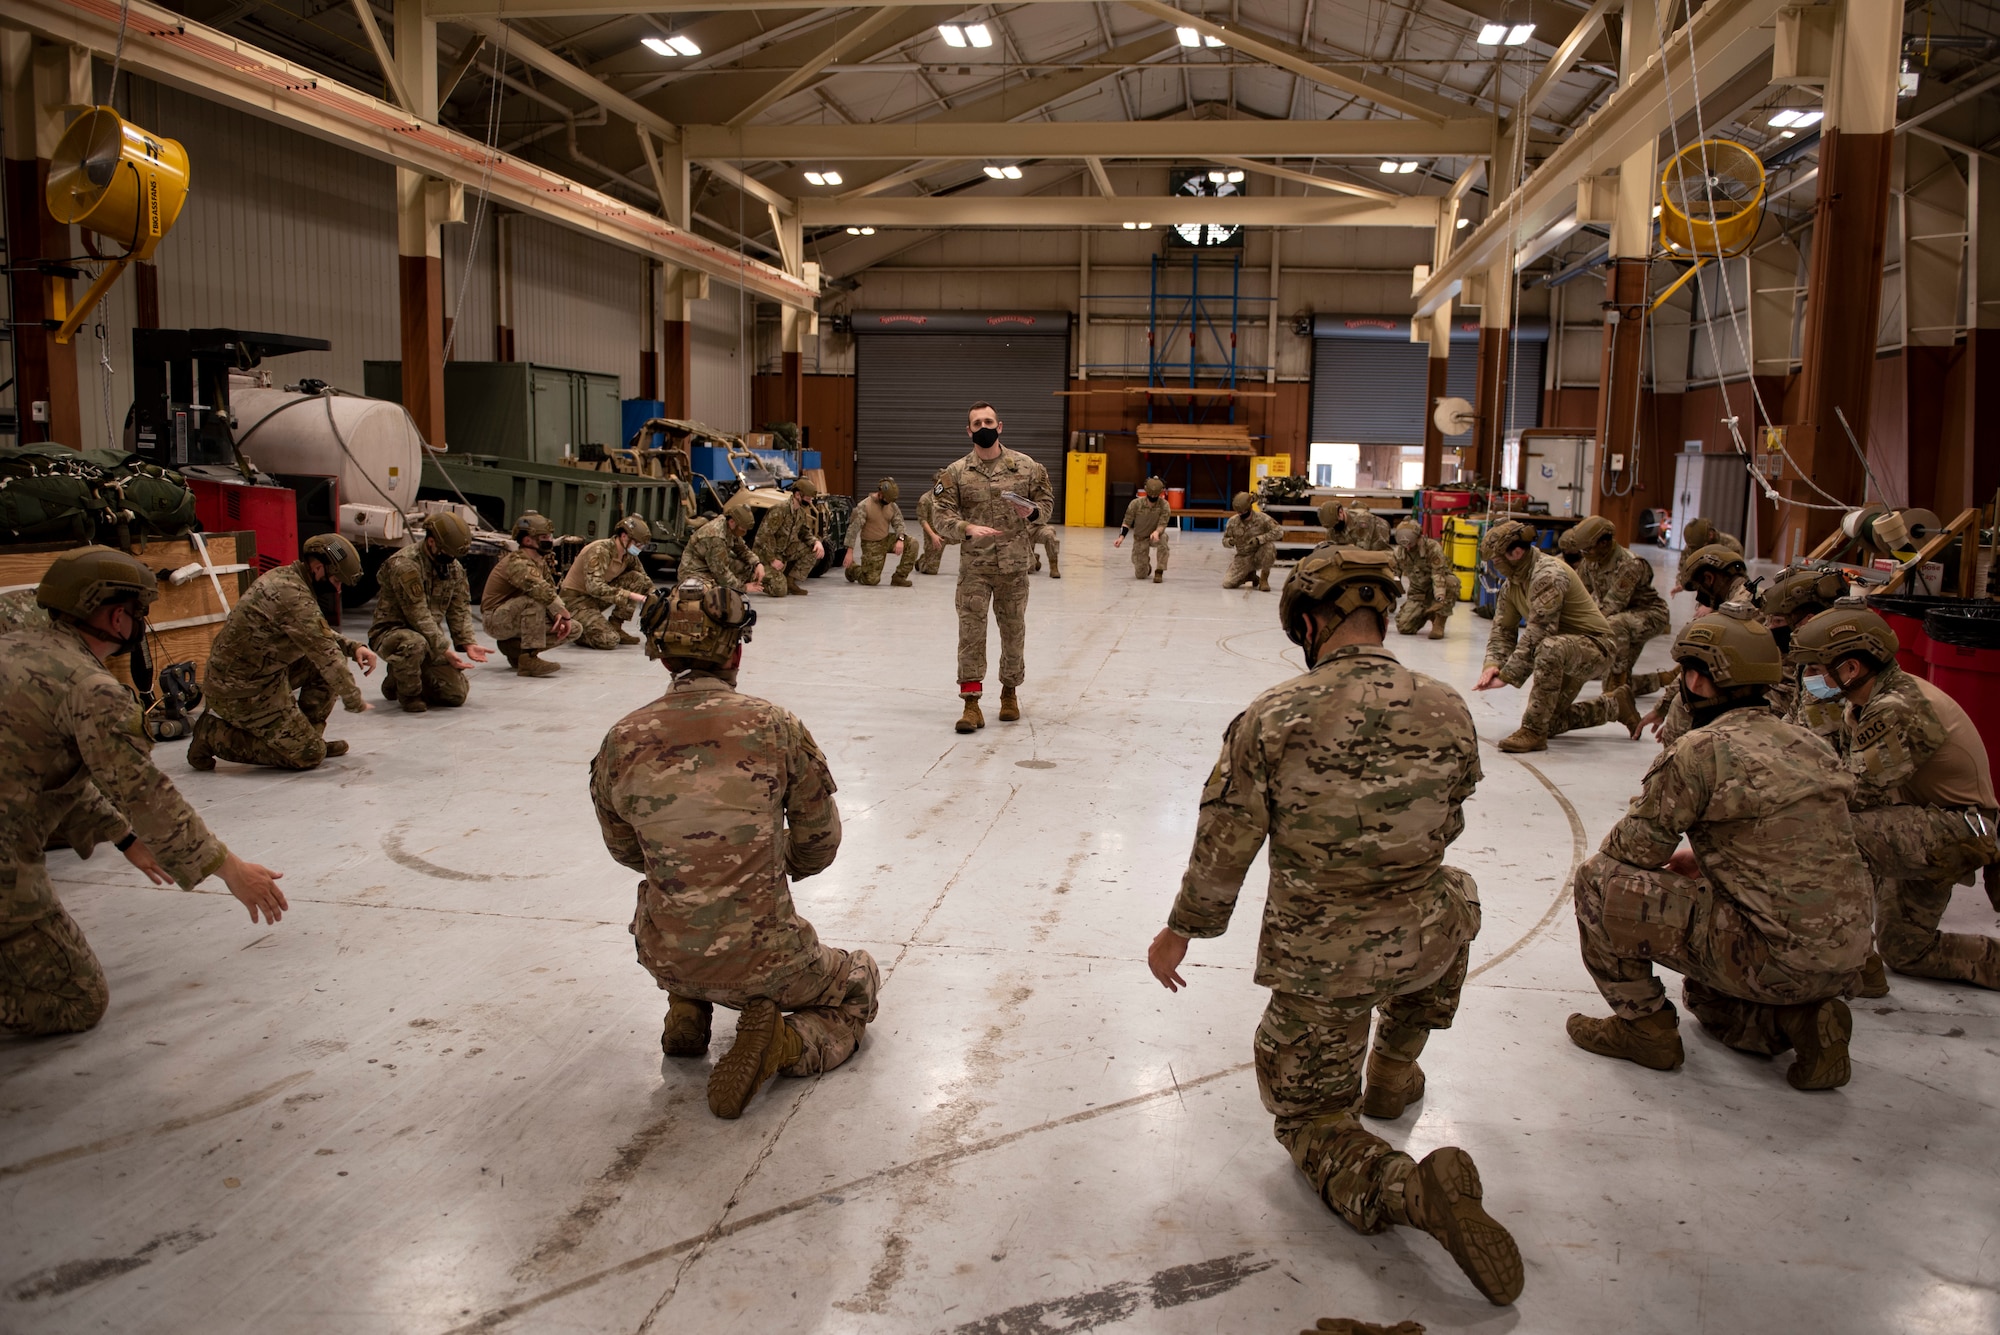 A photo of leadership explaining jumping procedures to Airmen.